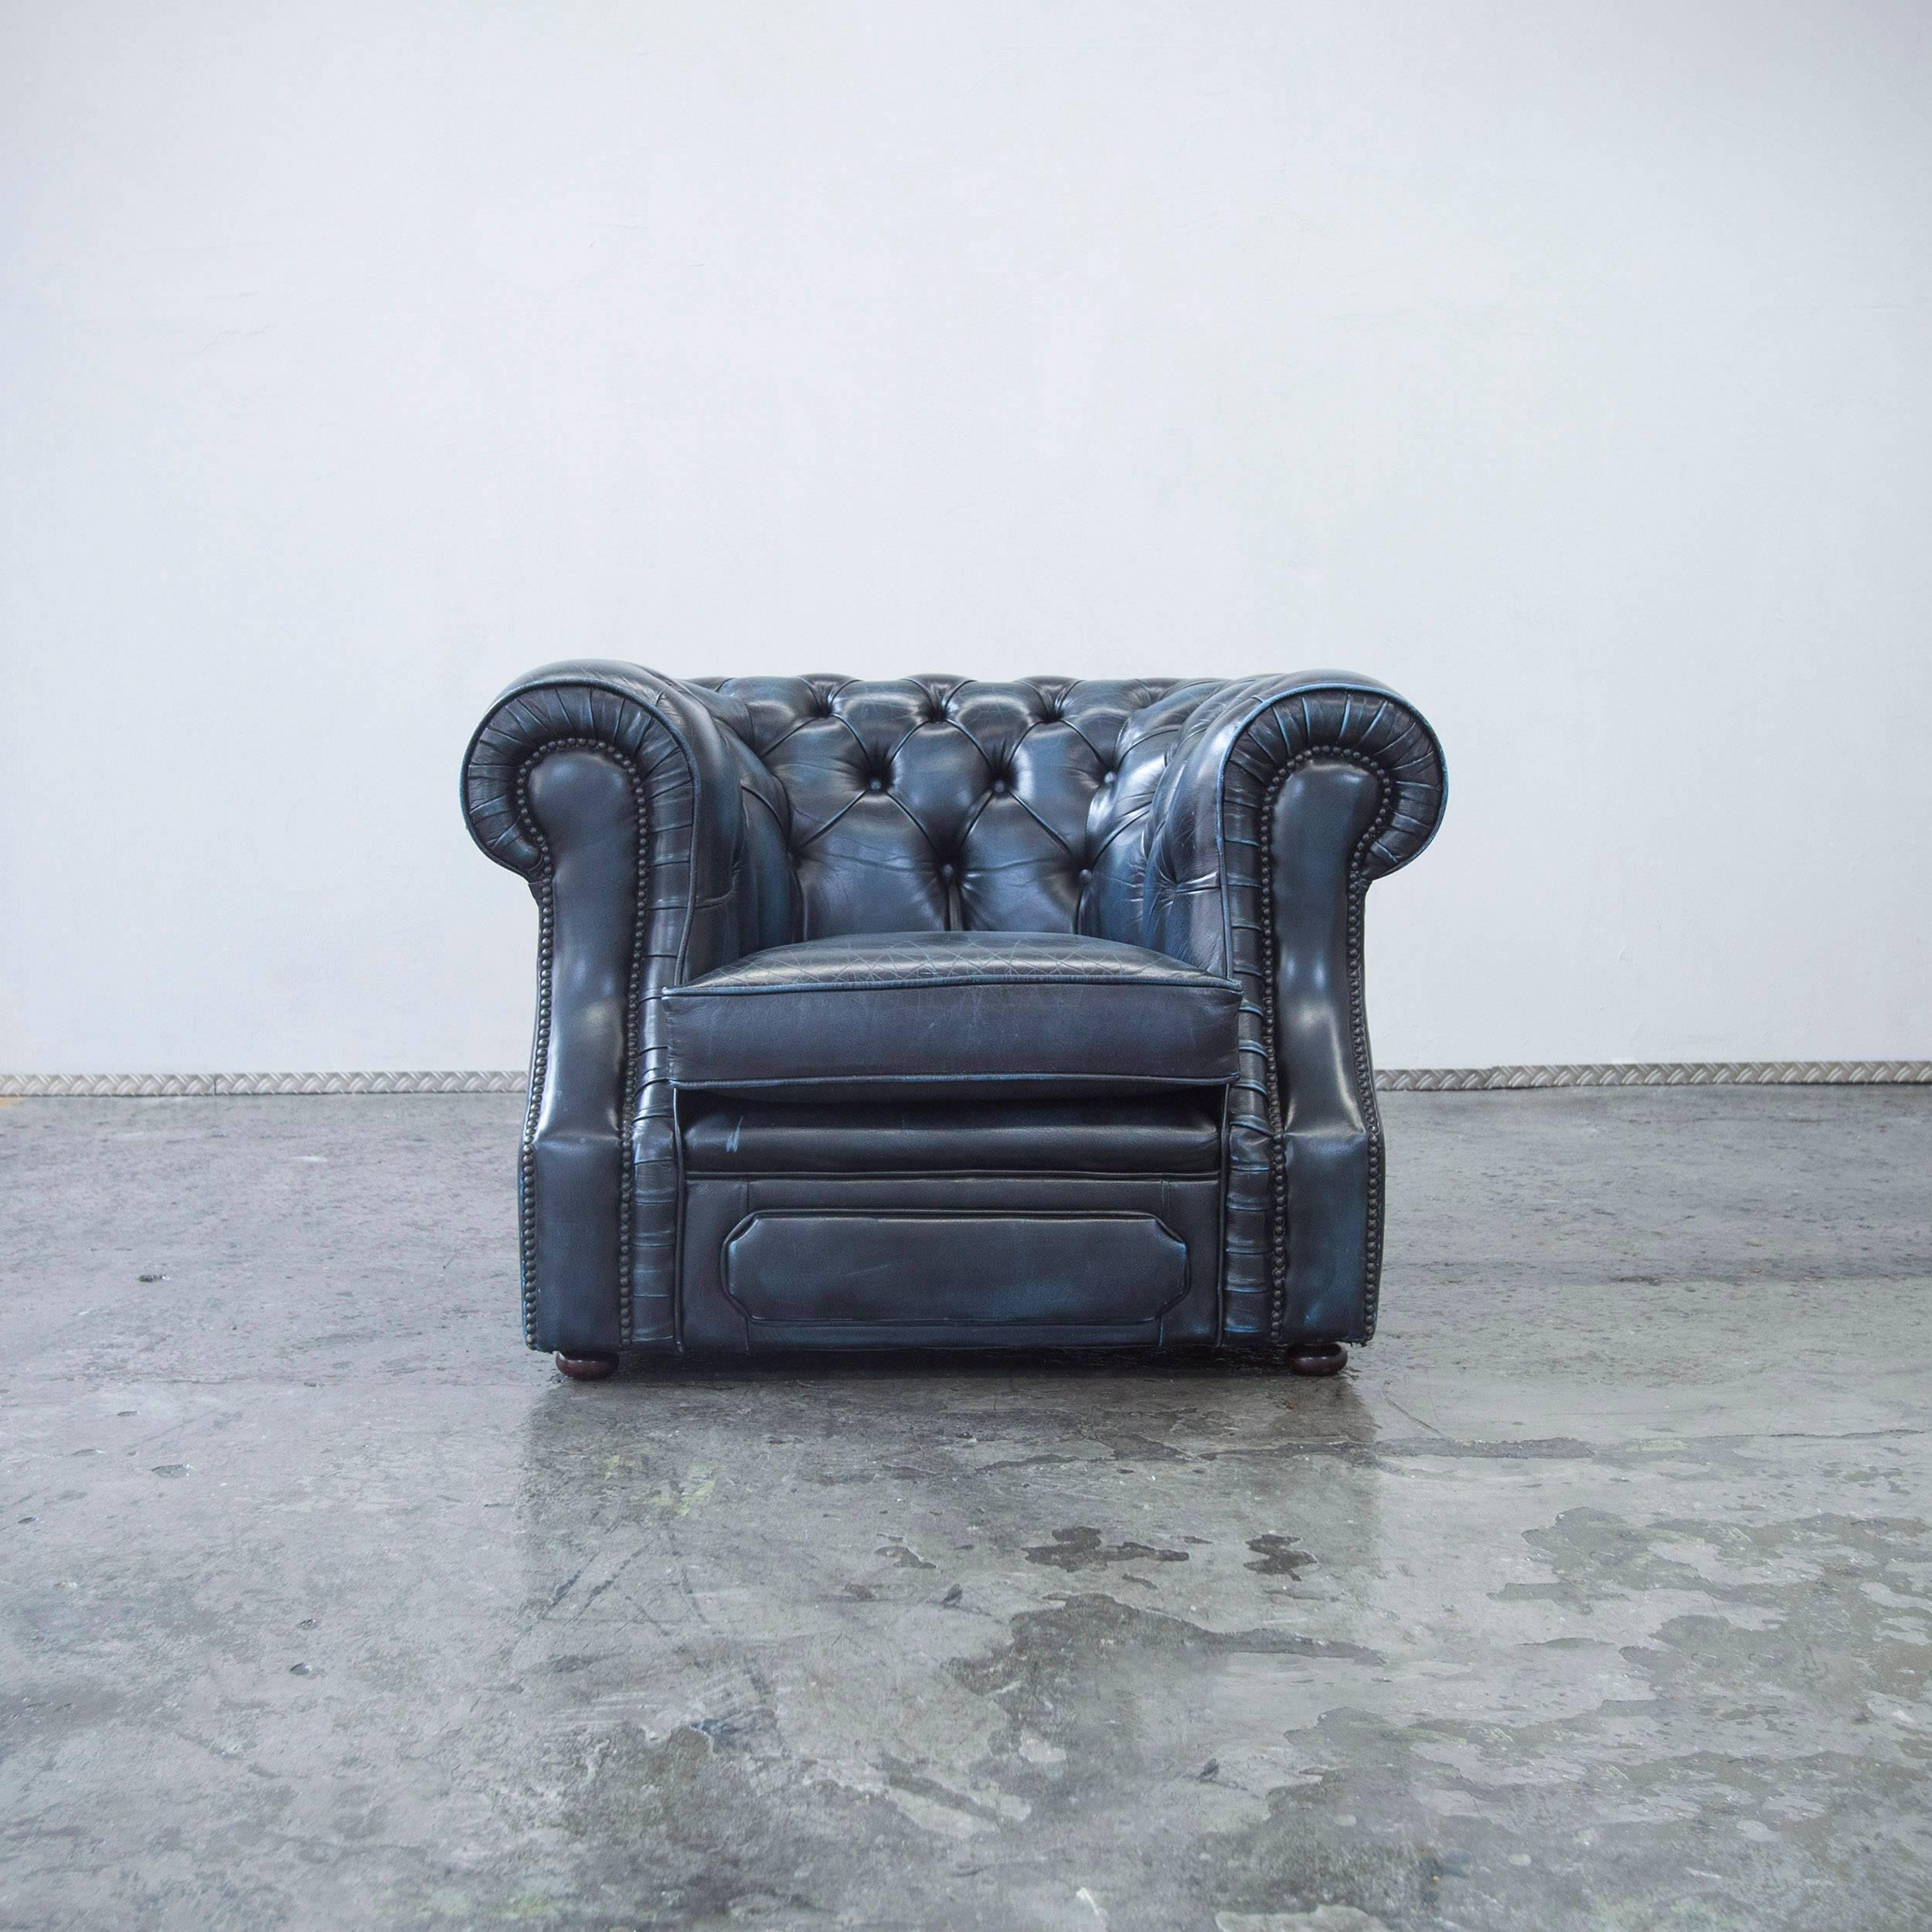 Blue colored original Chesterfield leather chair in a vintage design, made for pure comfort and elegance.